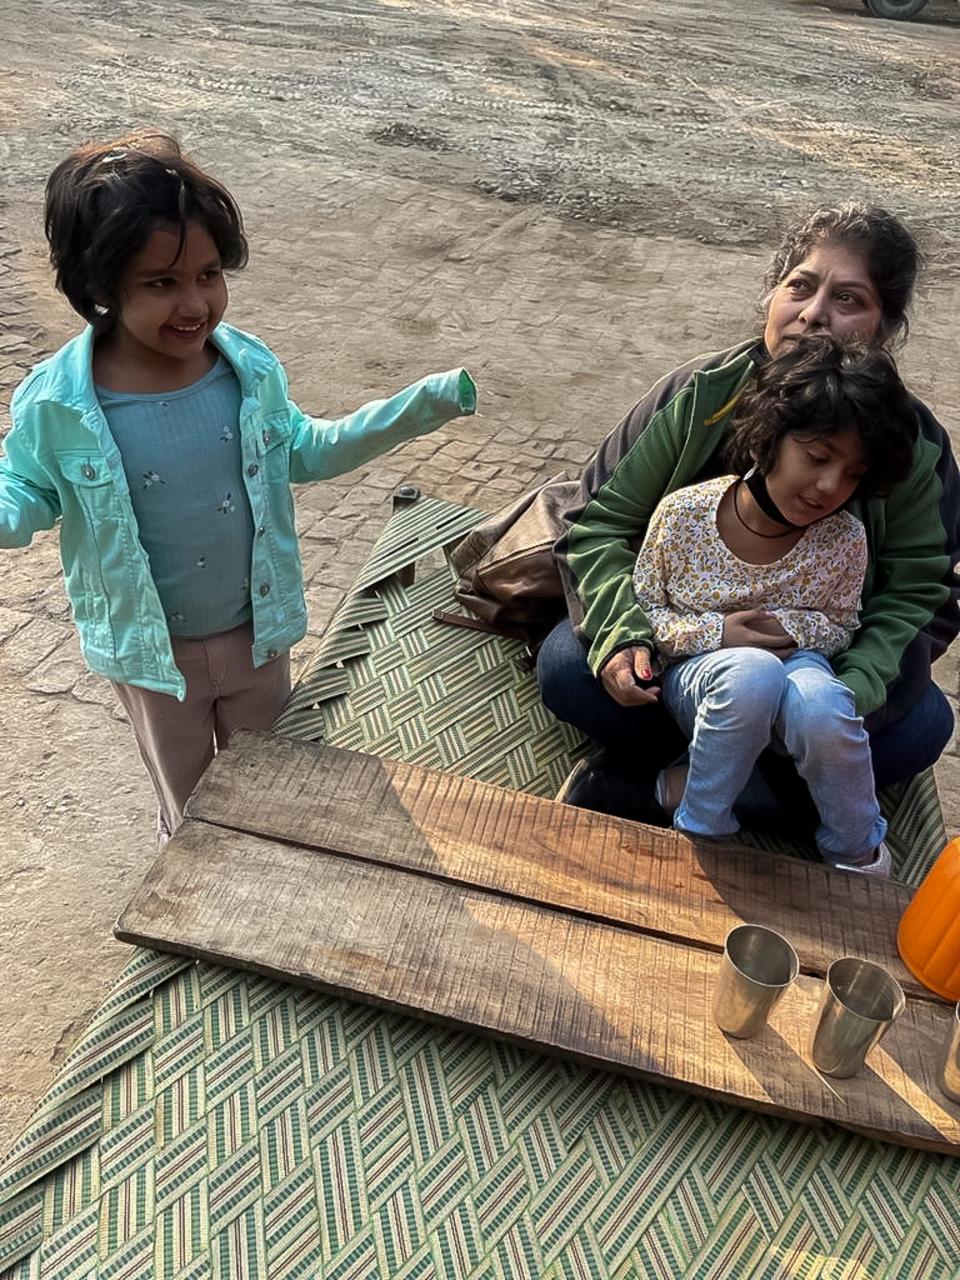 Priya Guru, of Wrightstown, on a 2021 trip to India visiting Aradhya, 9, left, and Riddhima, 8. Guru and her fiance, Ashni Kumar, have been working for three years to adopt the two sisters and bring them to the U.S.